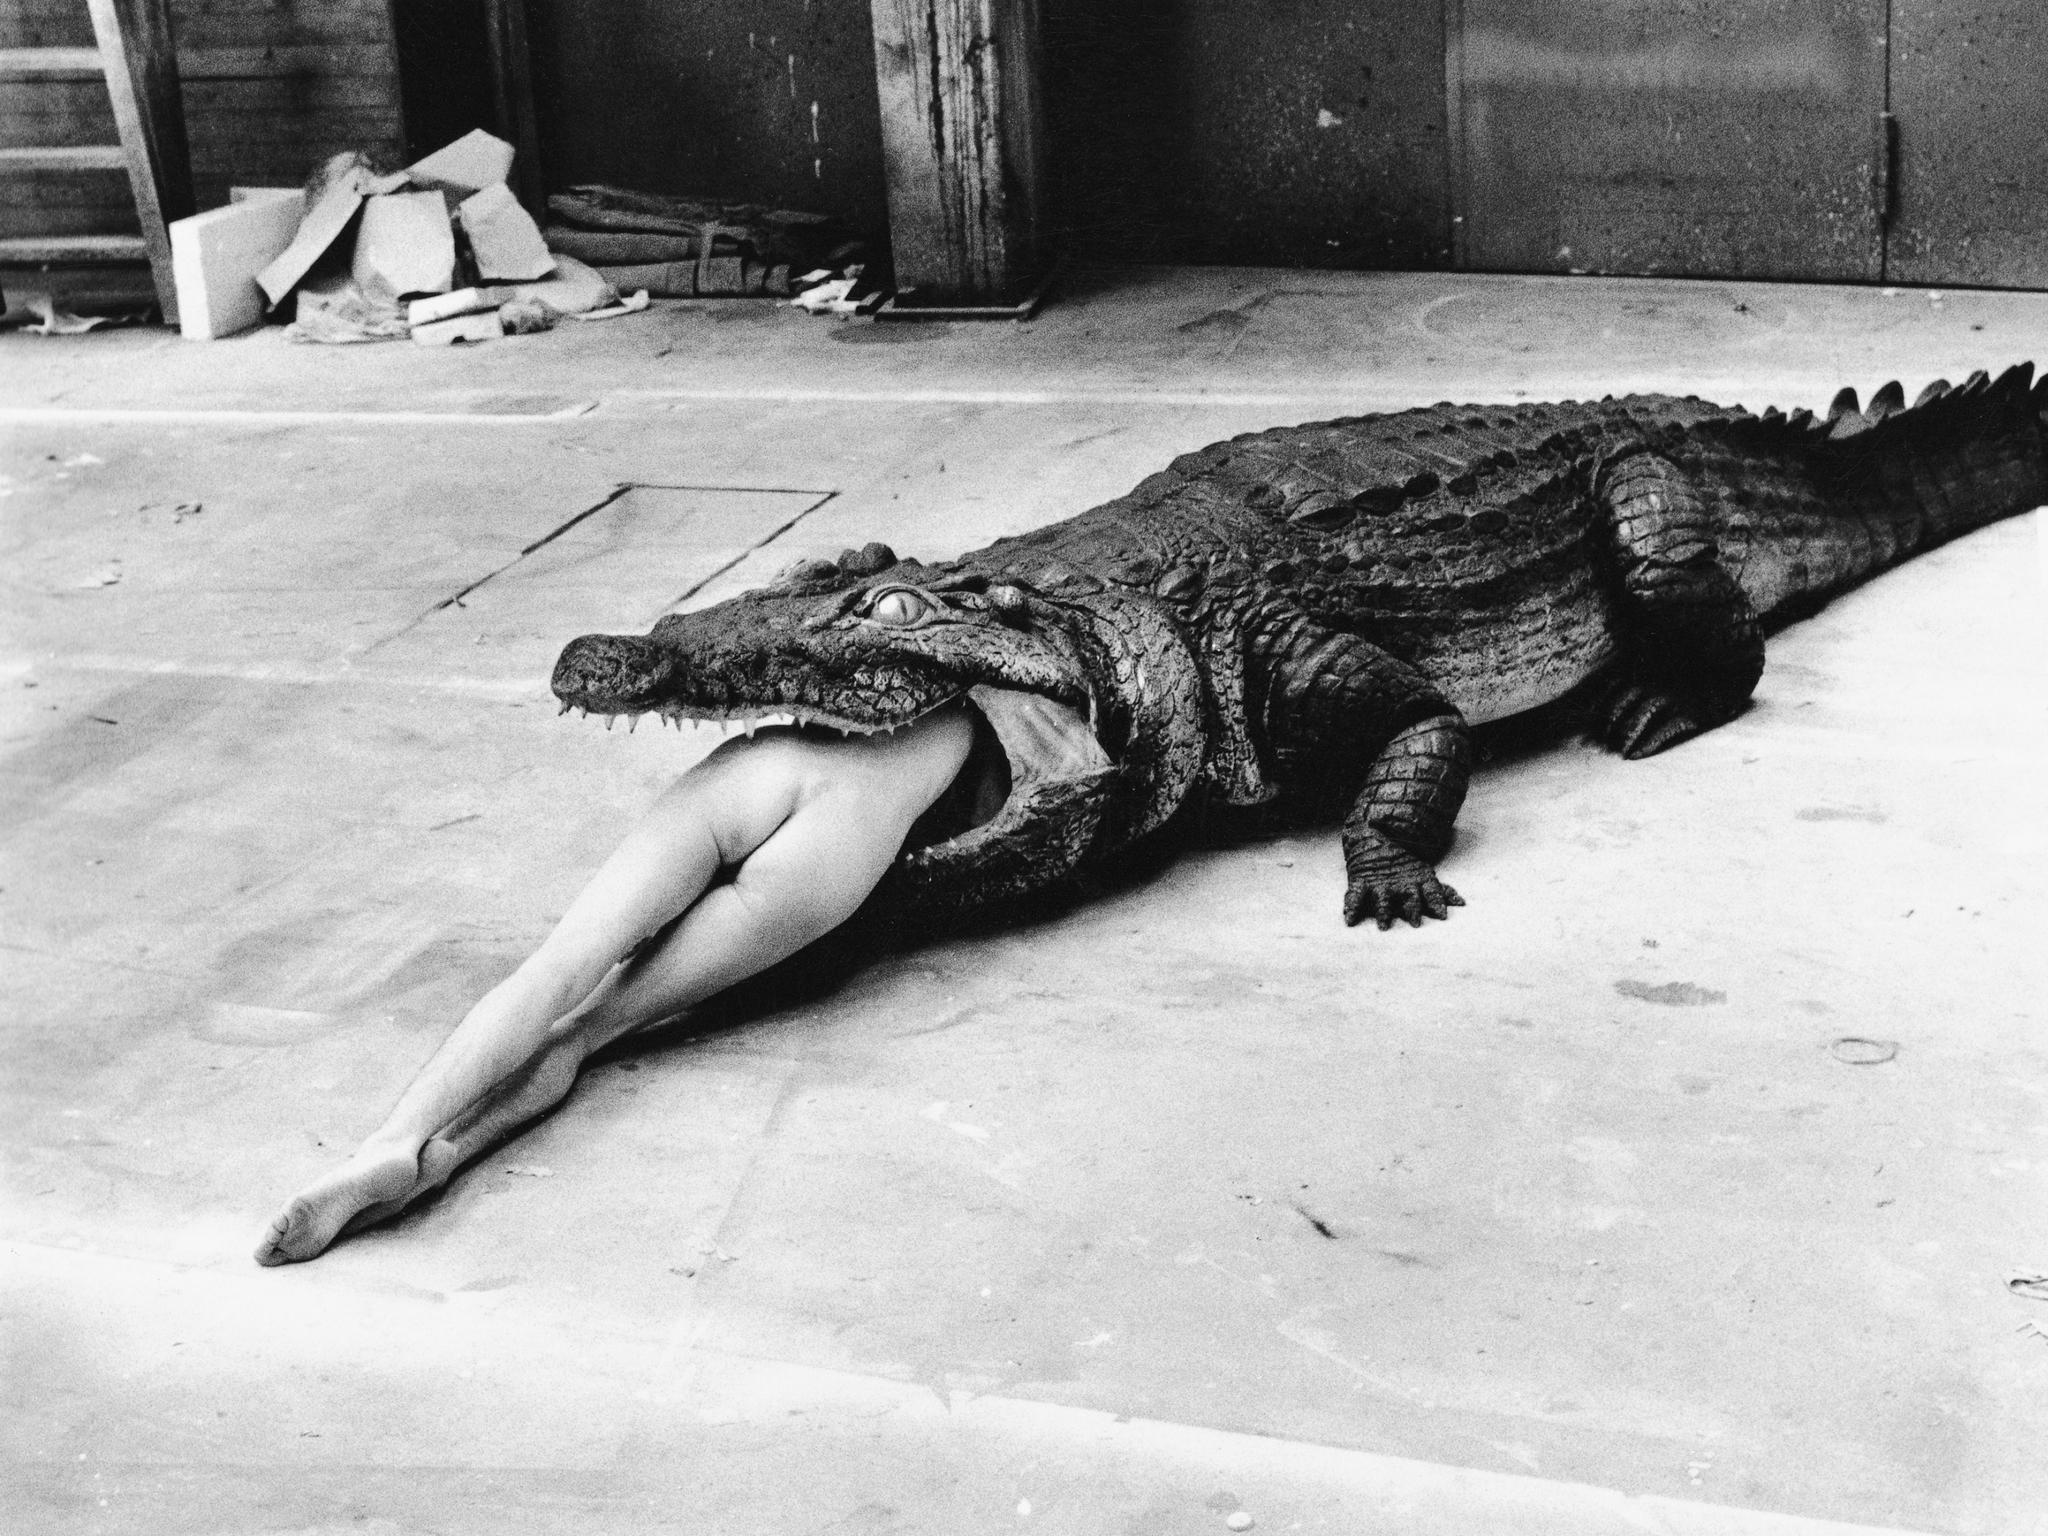 Was bad boy photographer Helmut Newton a sexist or feminist, asks new film  The Bad and the Beautiful | The Australian